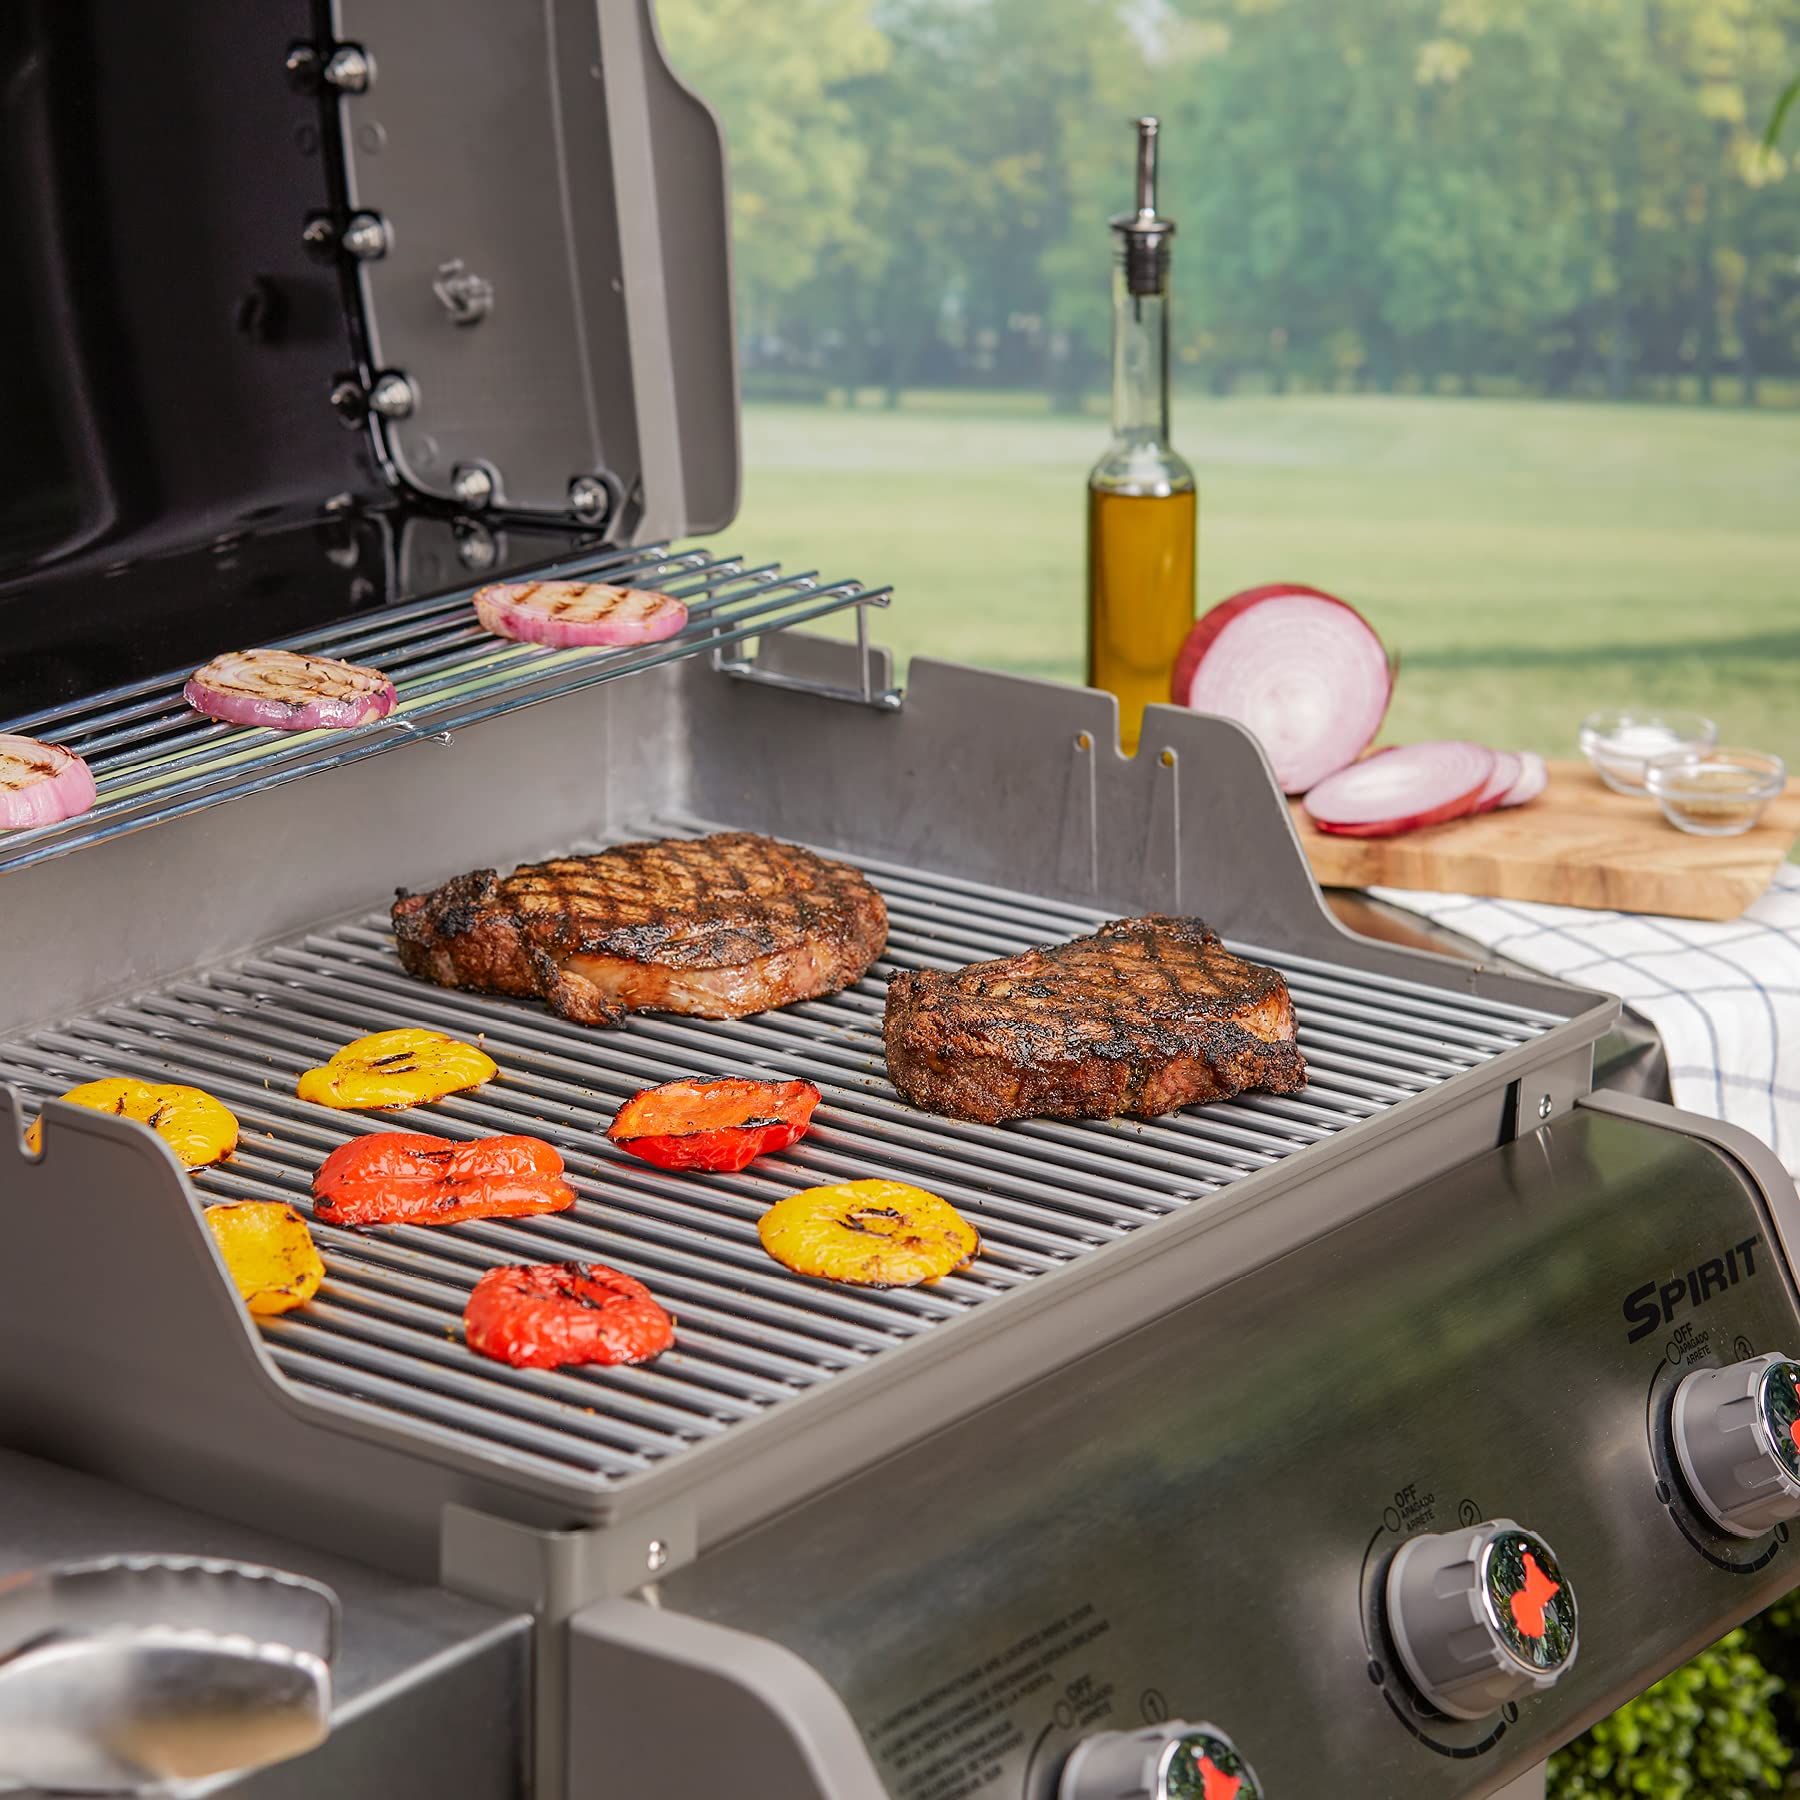 Need Bigger Grilling Space on Your Grill. : Discover These 3 Oversized Grill Grates for More Cooking Room